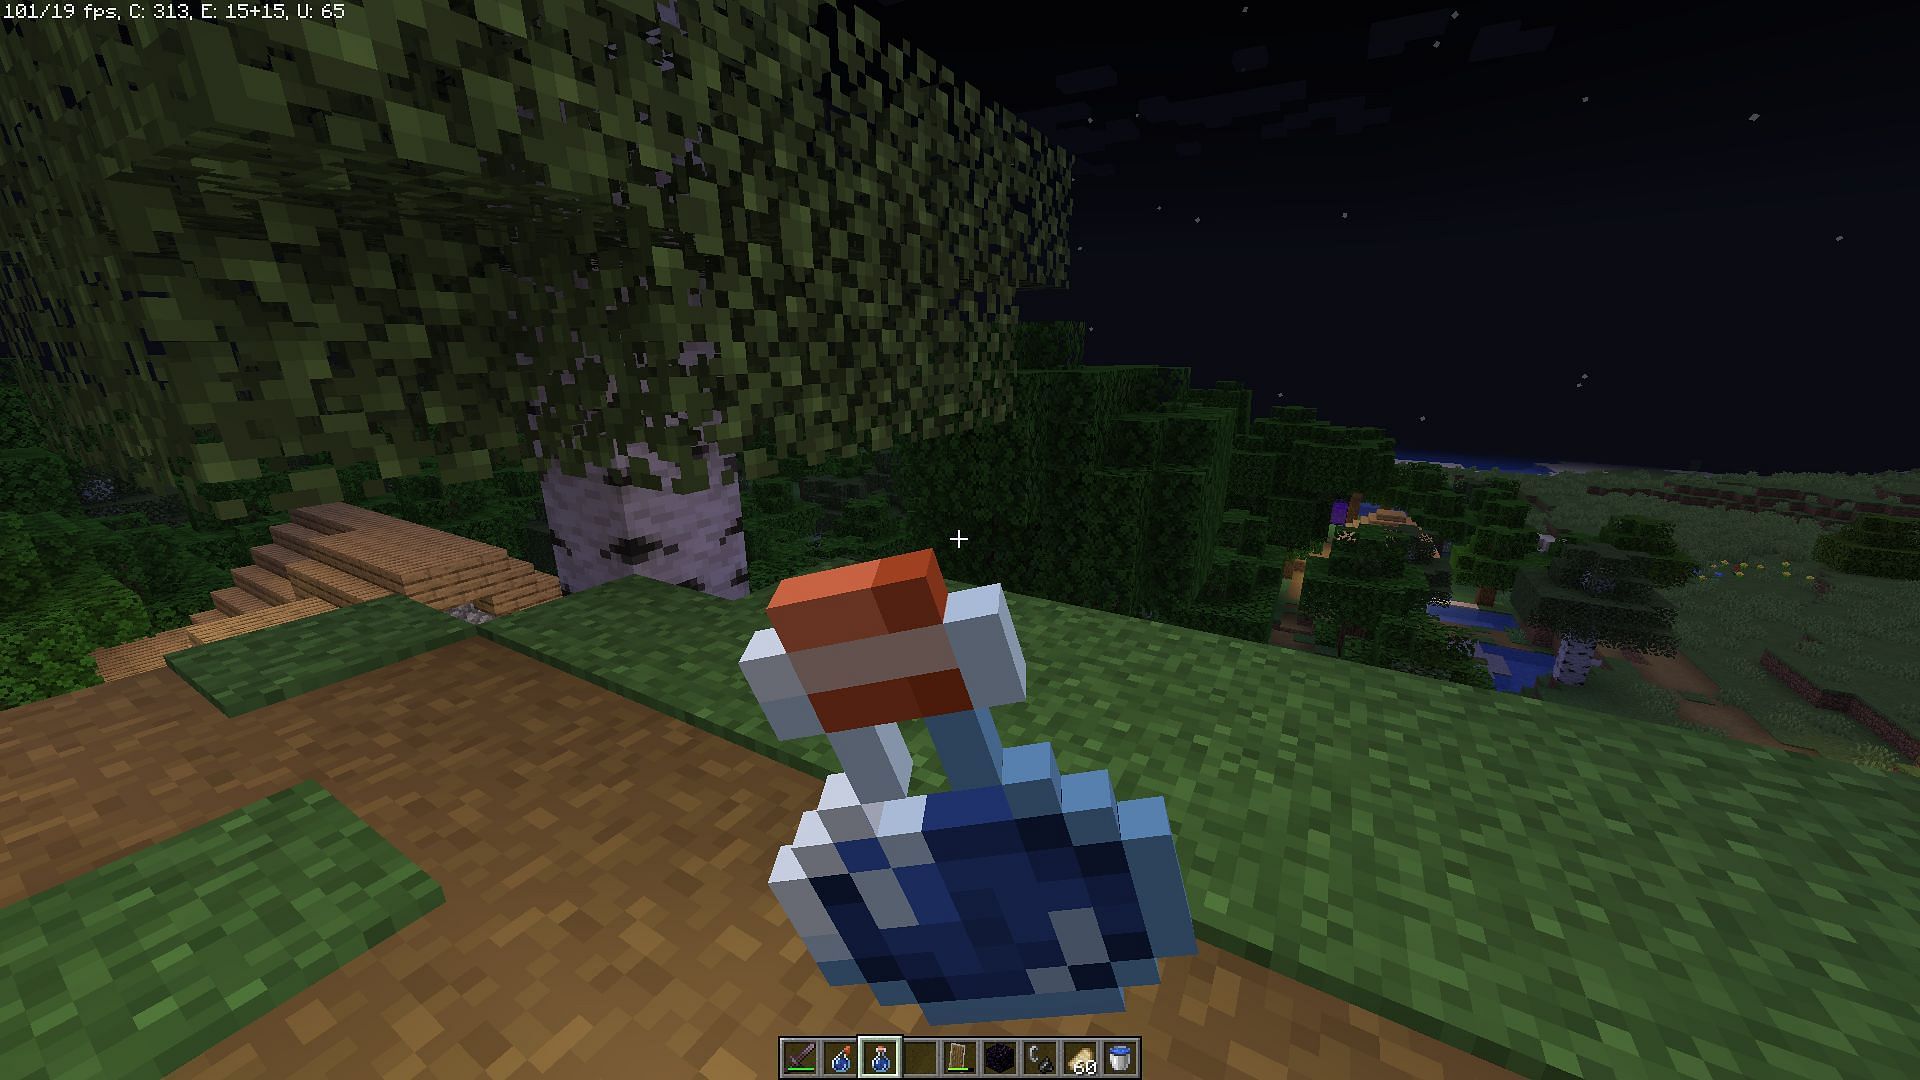 Drinking the bottle of water (Image via Mojang)